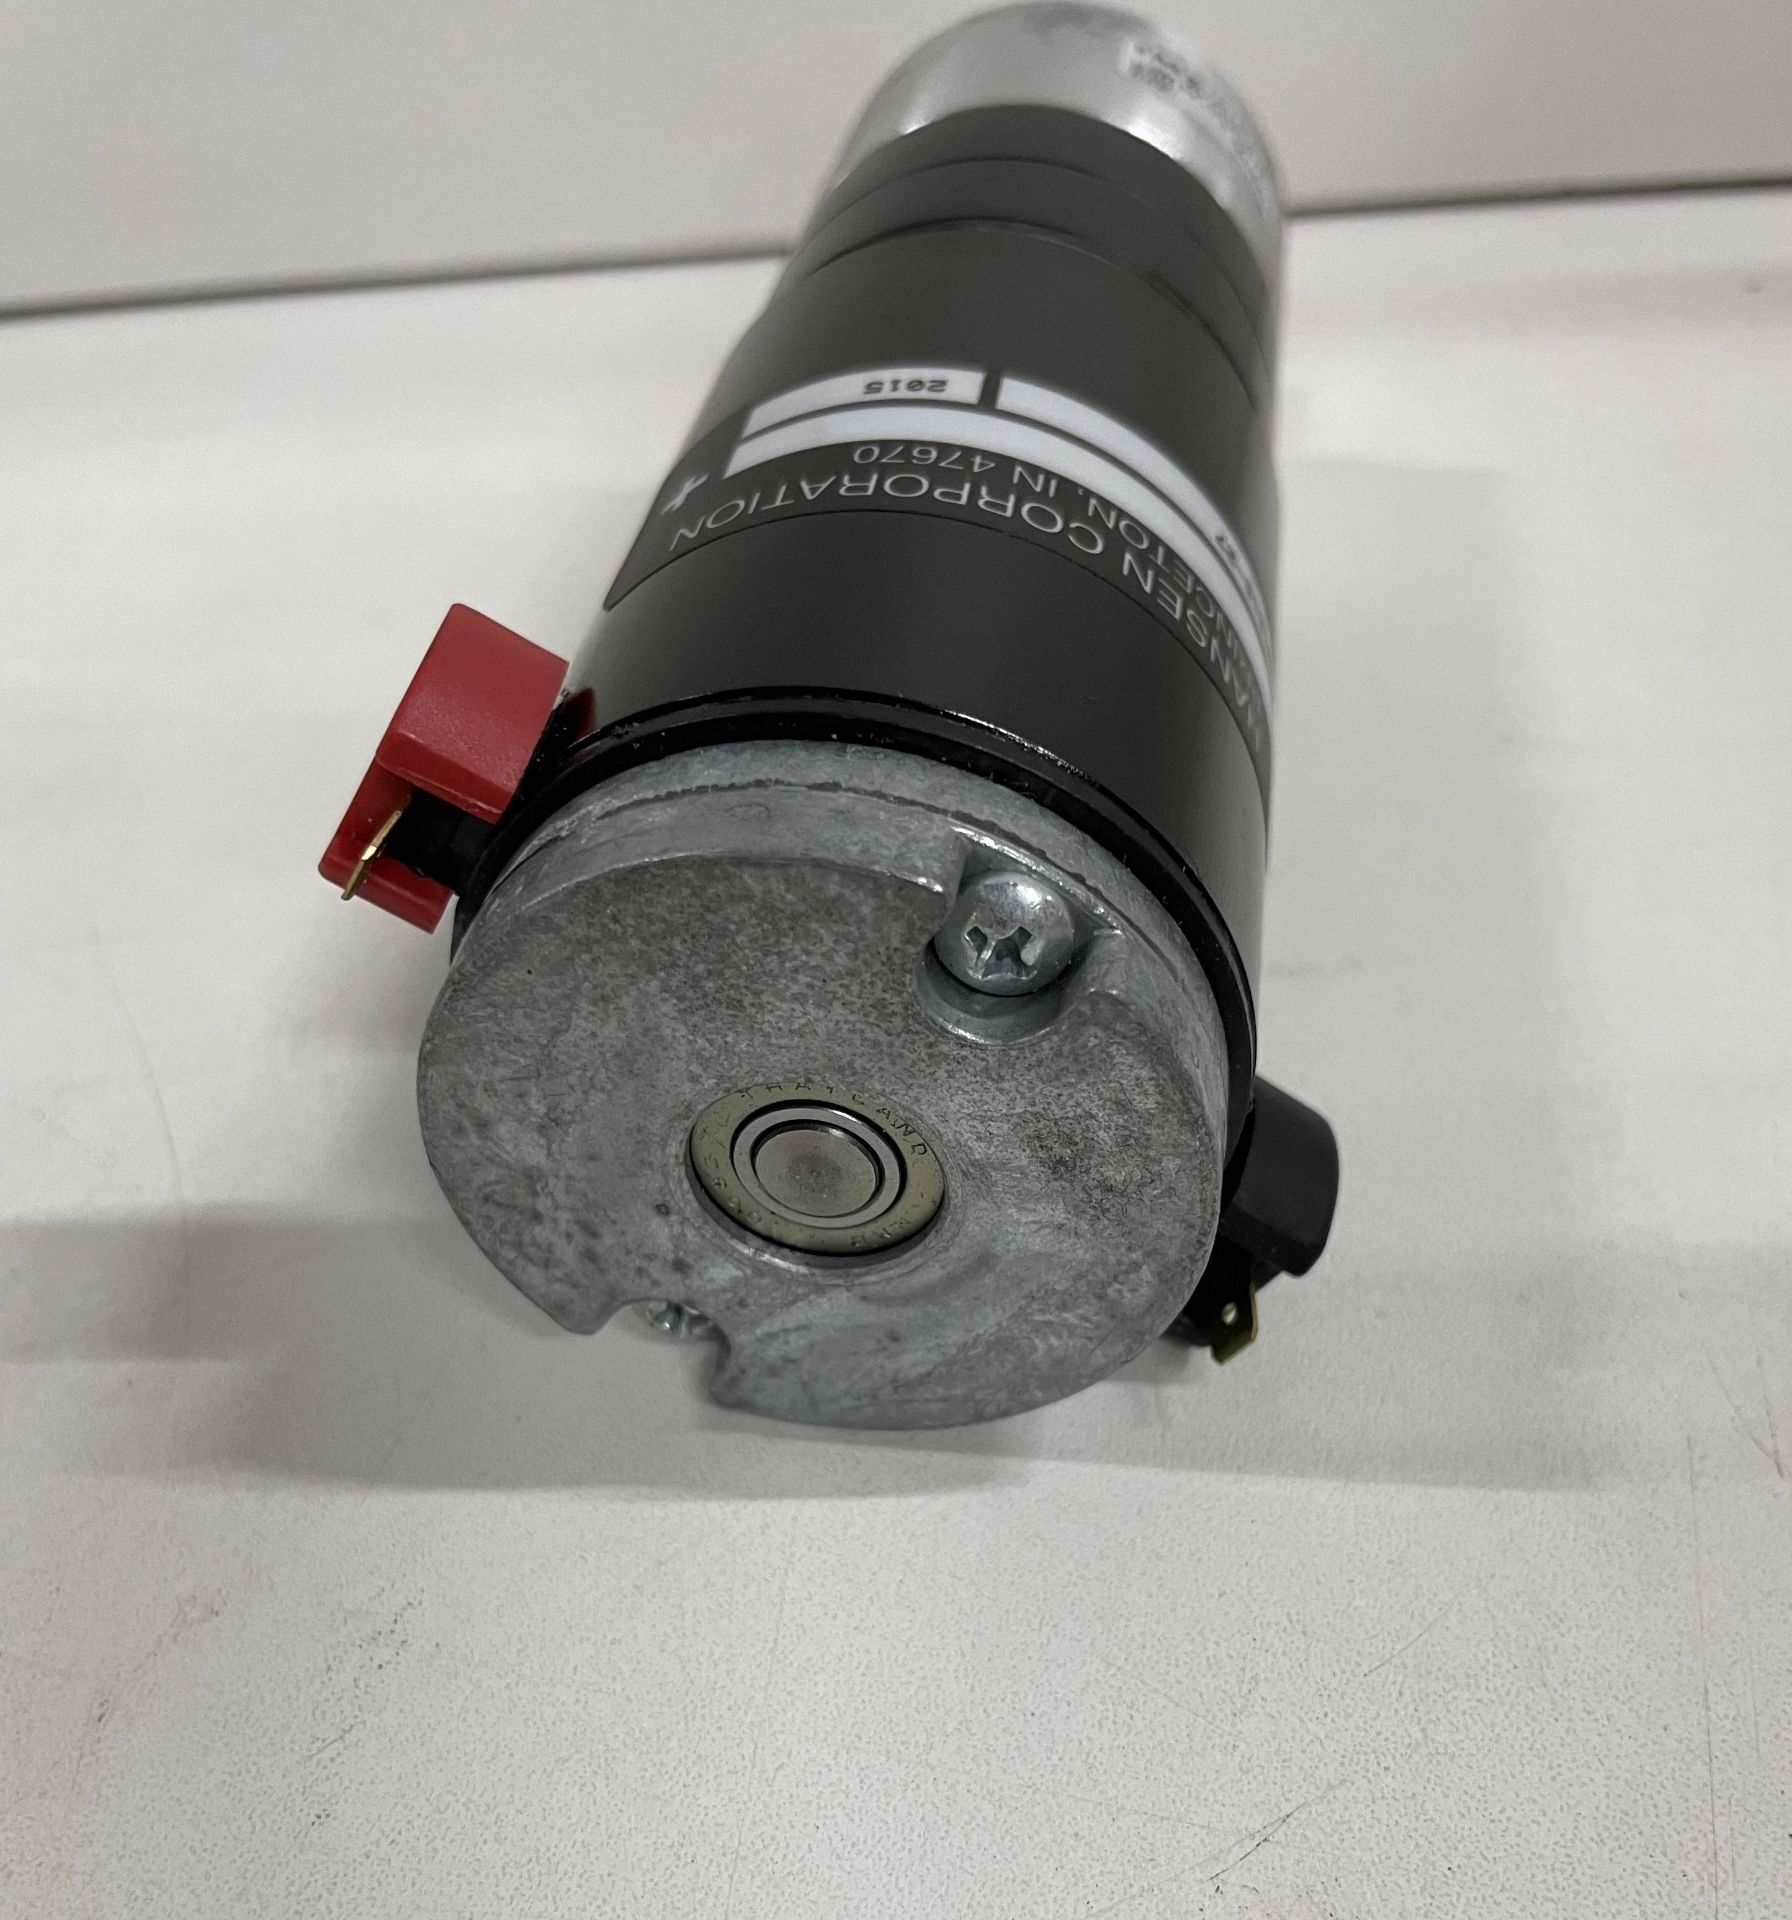 30 x Series 121-8 DC Planetary Gear Motor - Image 2 of 5